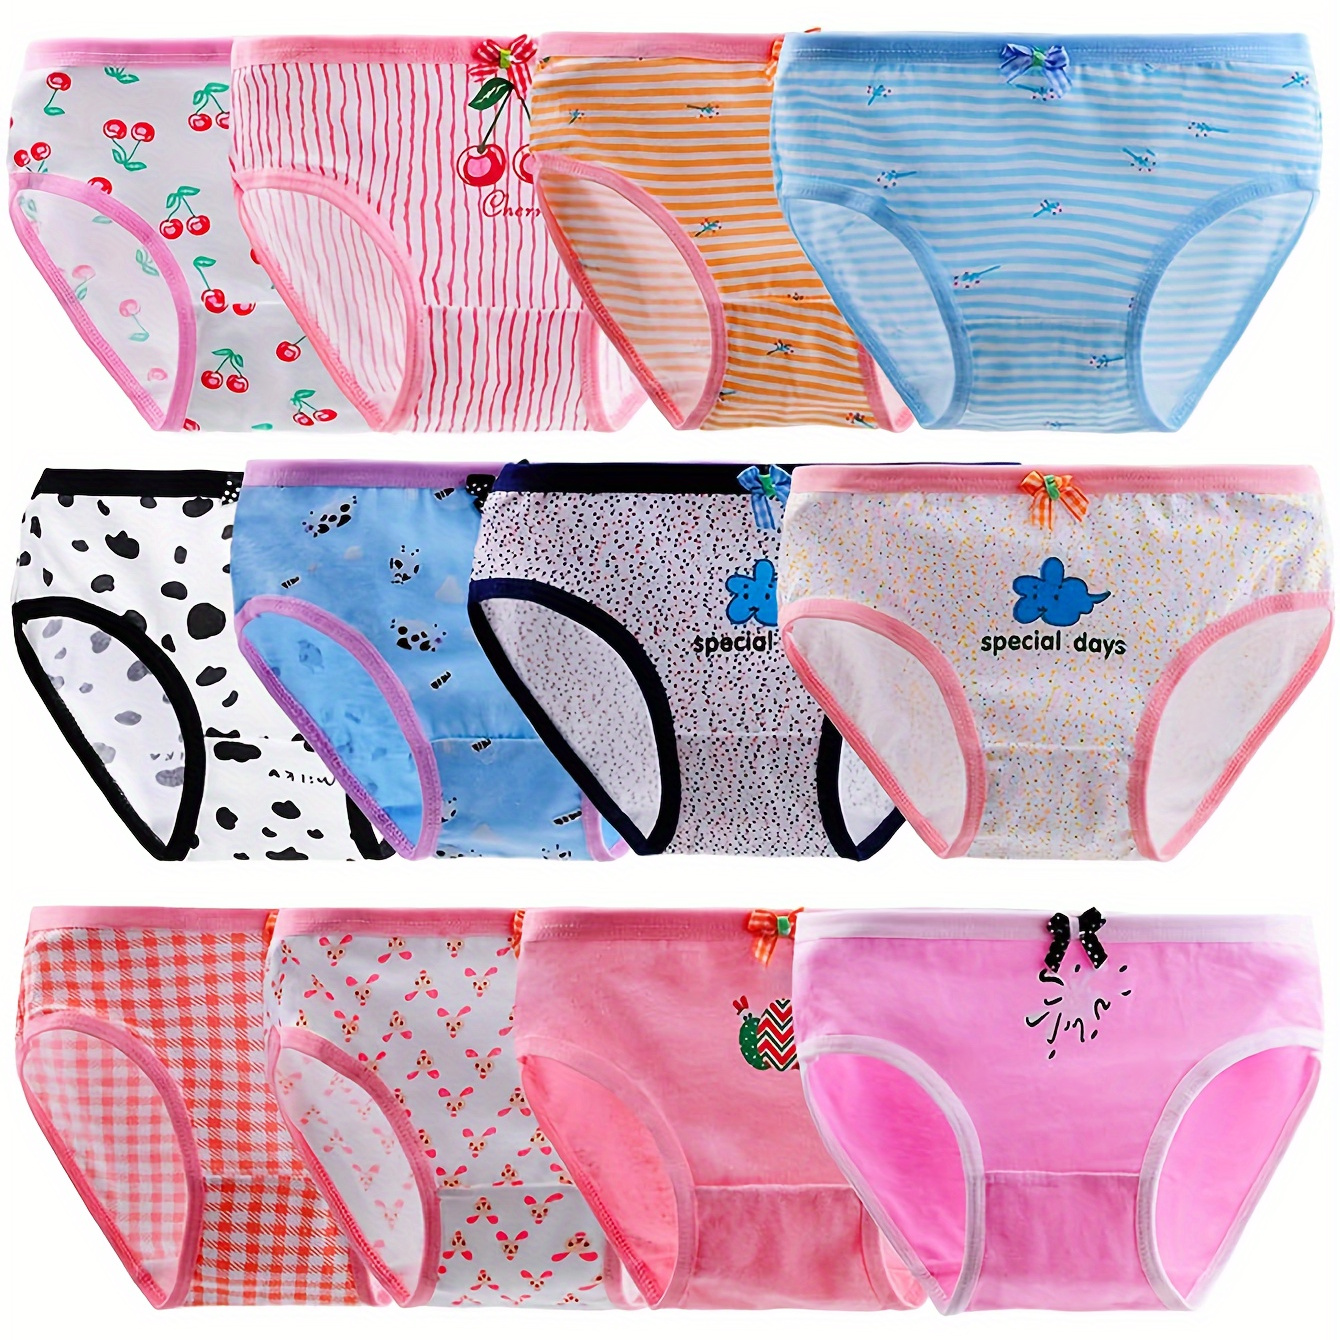 

12 Pairs Of Baby Briefs Soft And Comfortable Briefs Cotton Briefs Little Girl Group Briefs Ages 2-12